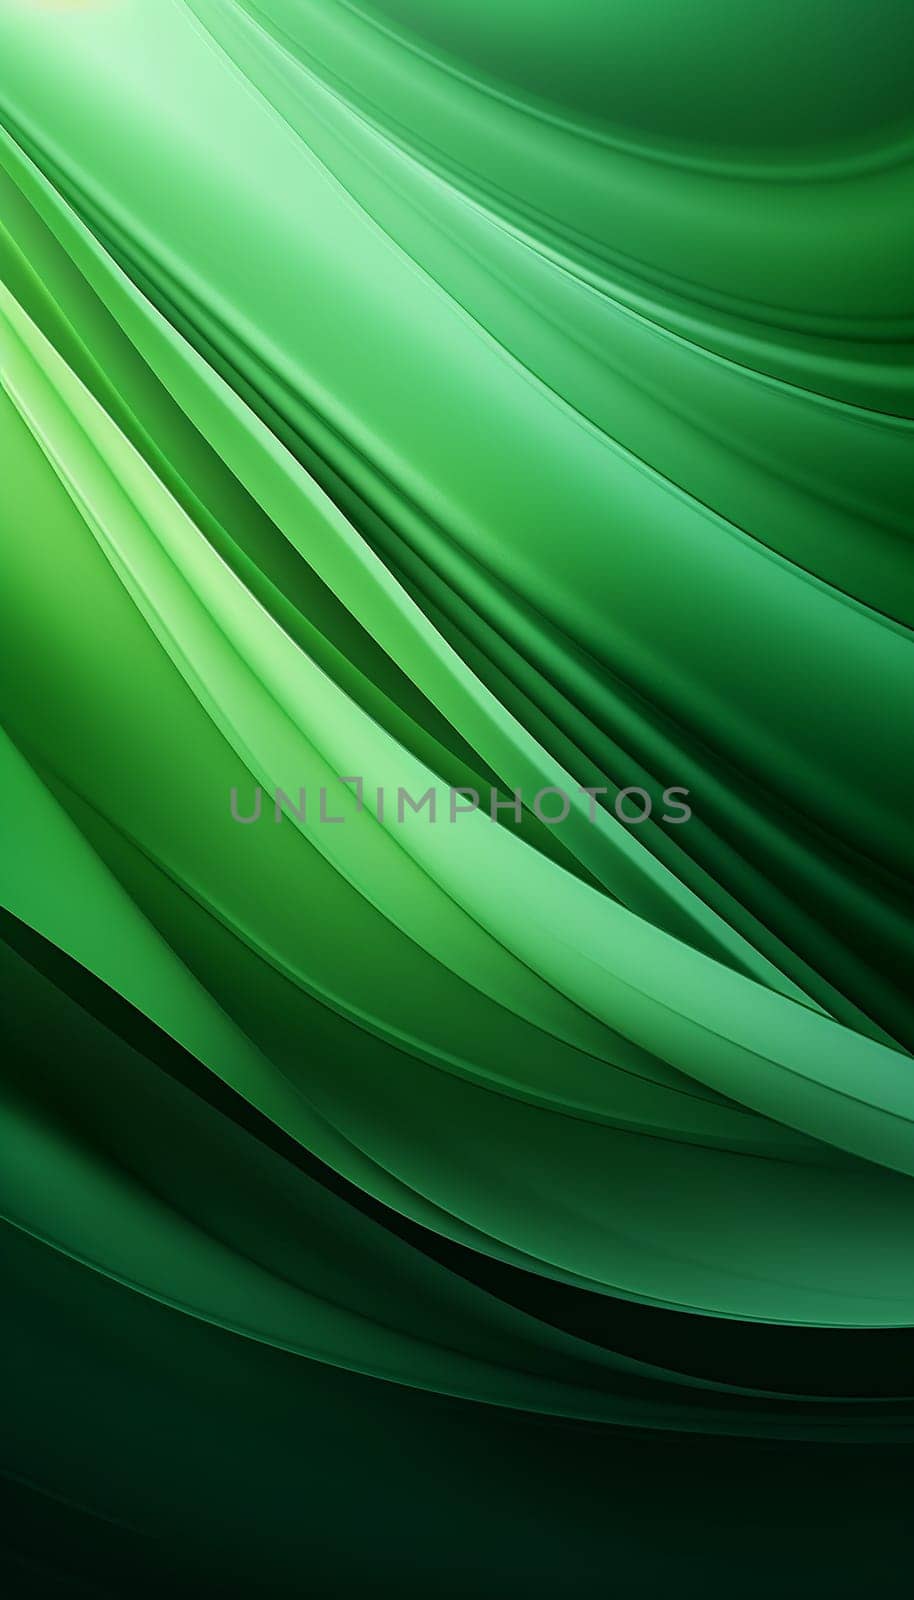 Wallpaper background , the above dynamic green   image Generate AI by Mrsongrphc